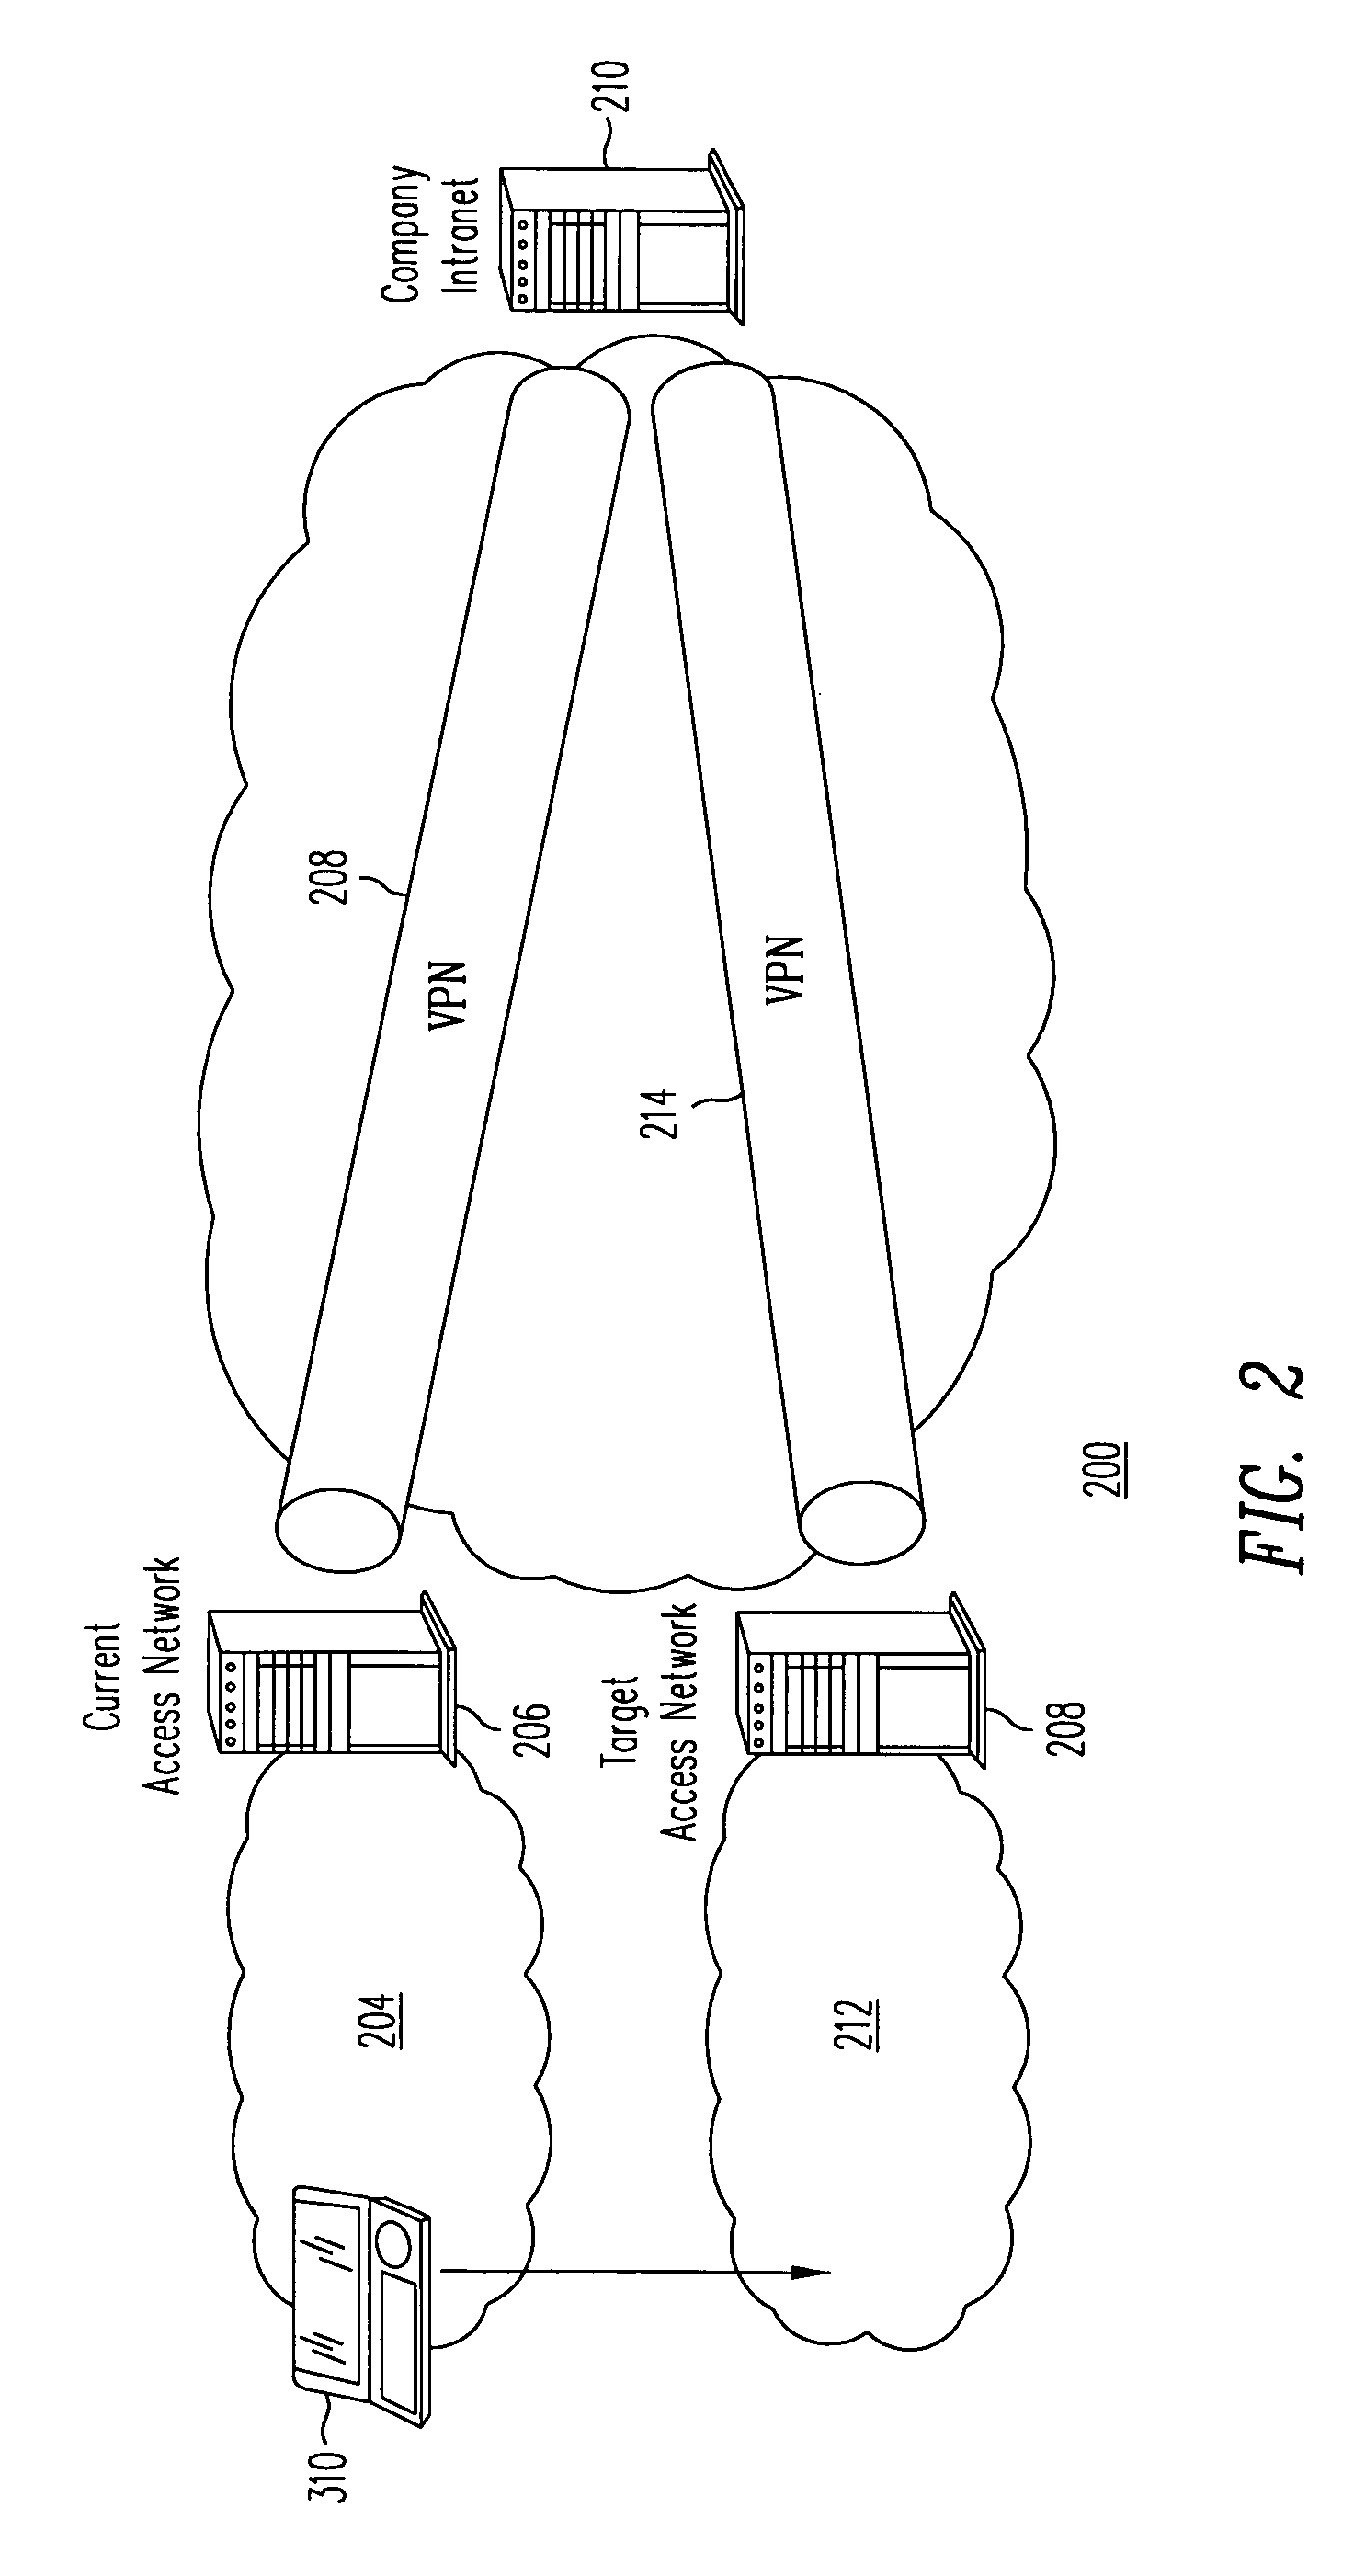 Method and associated apparatus for pre-authentication, preestablished virtual private network in heterogeneous access networks